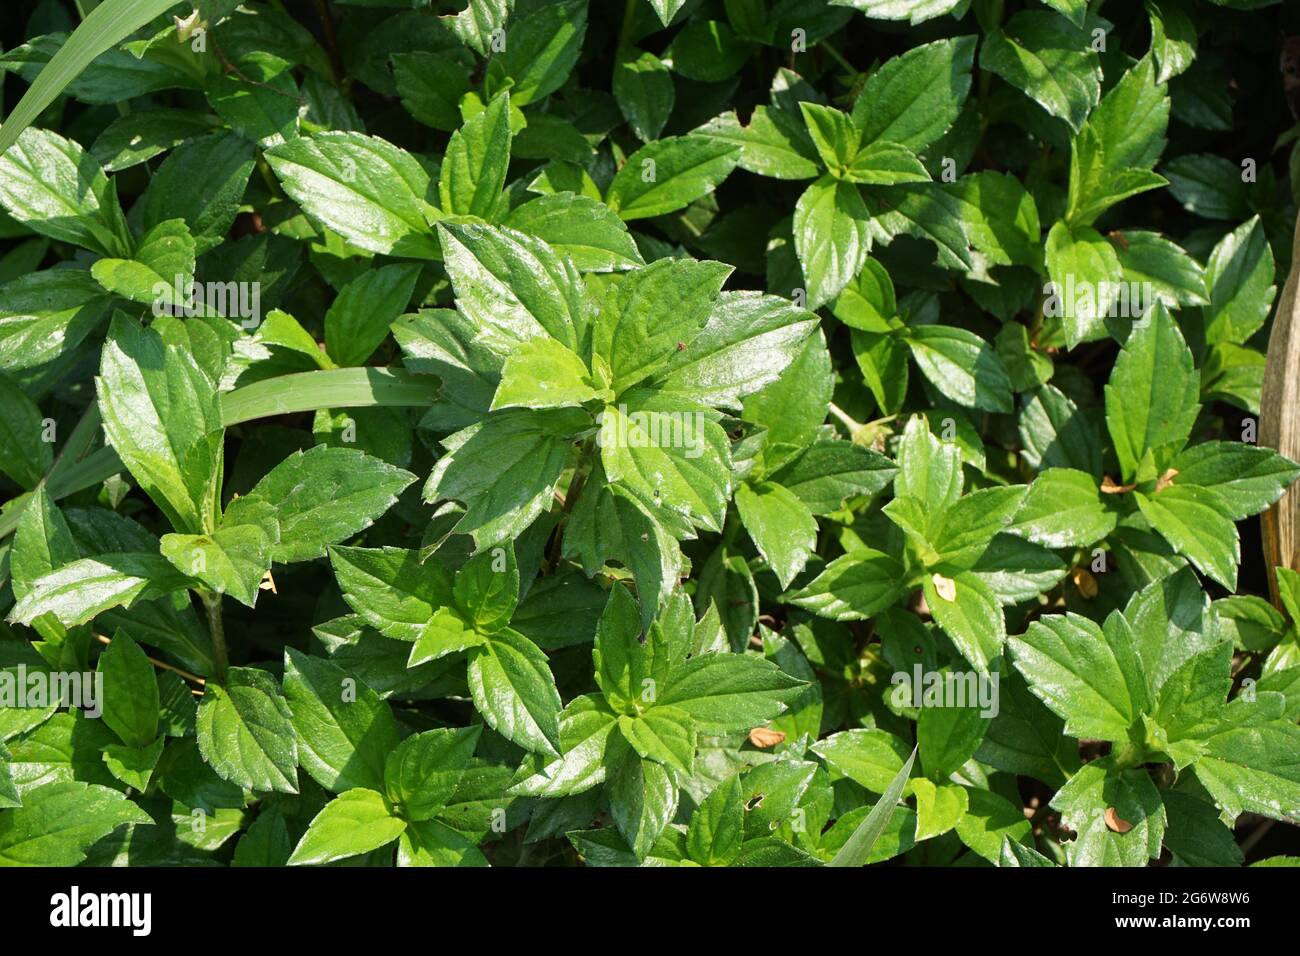 Sphagneticola trilobata with a natural background. Also called Bay Biscayne creeping oxeye, Singapore daisy, creeping oxeye, trailing daisy, wedelia Stock Photo